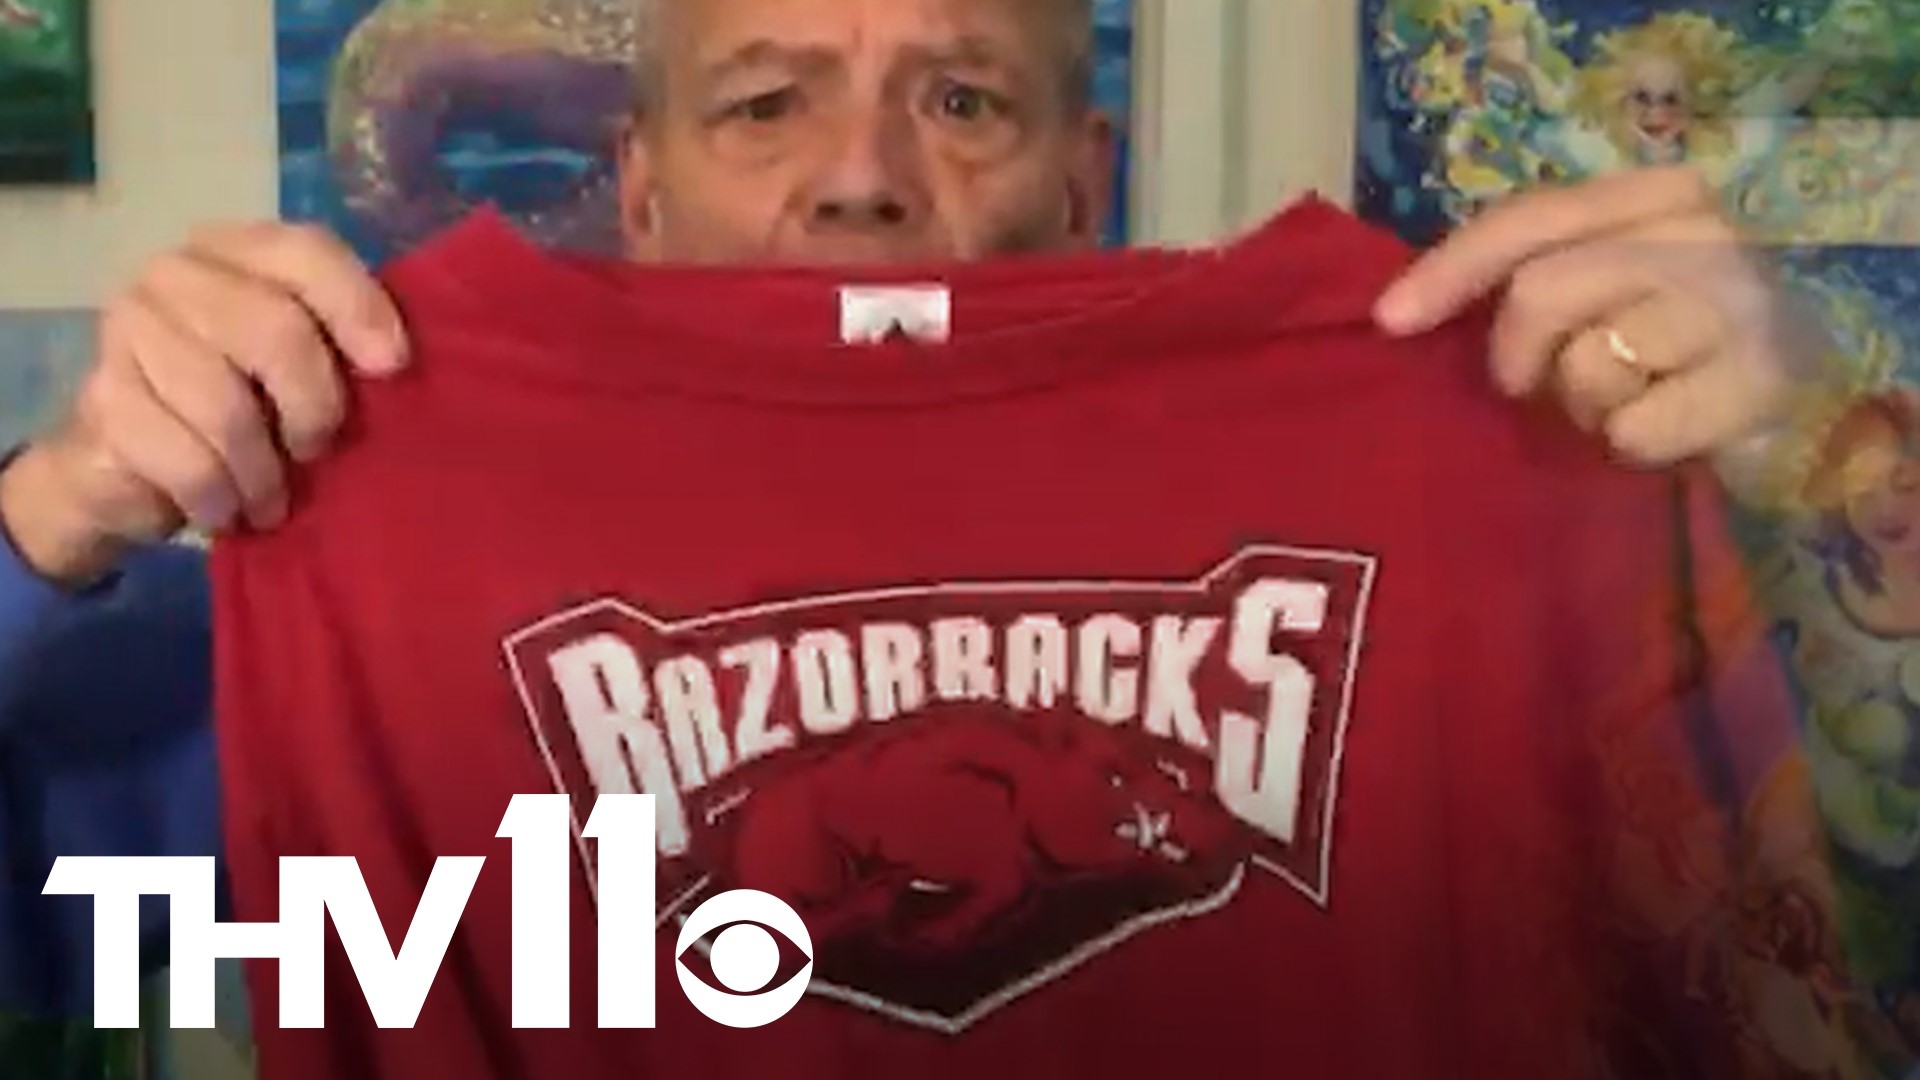 Craig O'Neill shares with us what he thinks was one of the best moments in Razorback sports history.